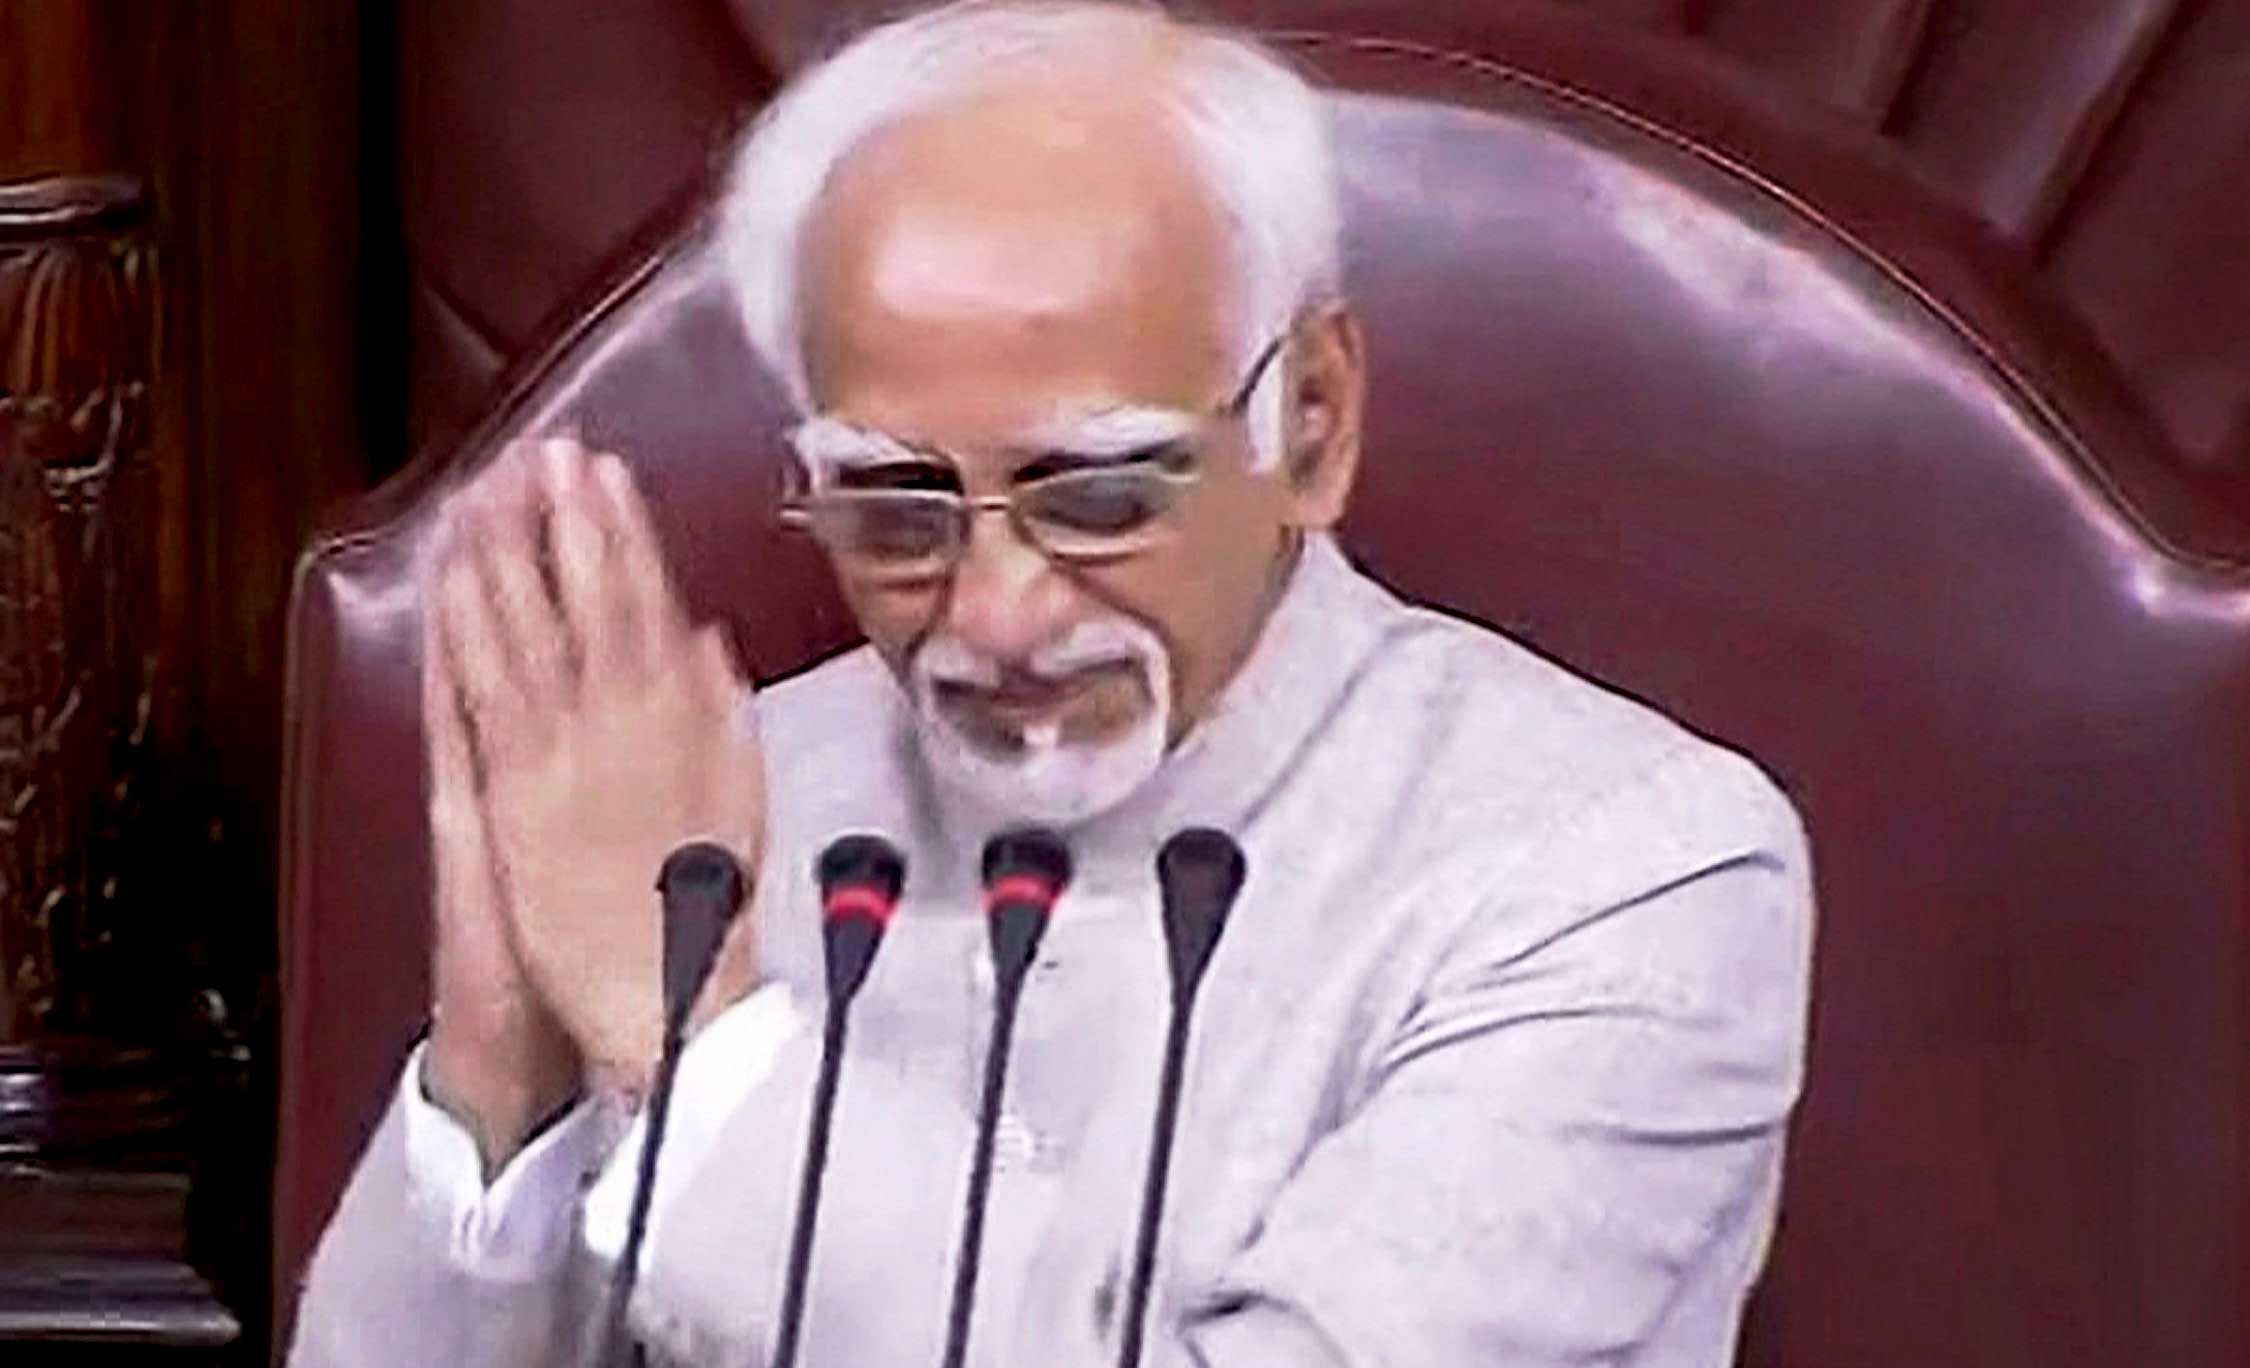 Vice President Hamid Ansari gestures while chairing his last session in the Rajya Sabha, in New Delhi on Thursday. Ansari, whose tenure as Vice-President comes to a close on Thursday, was given a farewell in the Rajya Sabha where he has served as Chairman for the last decade. PTI Photo